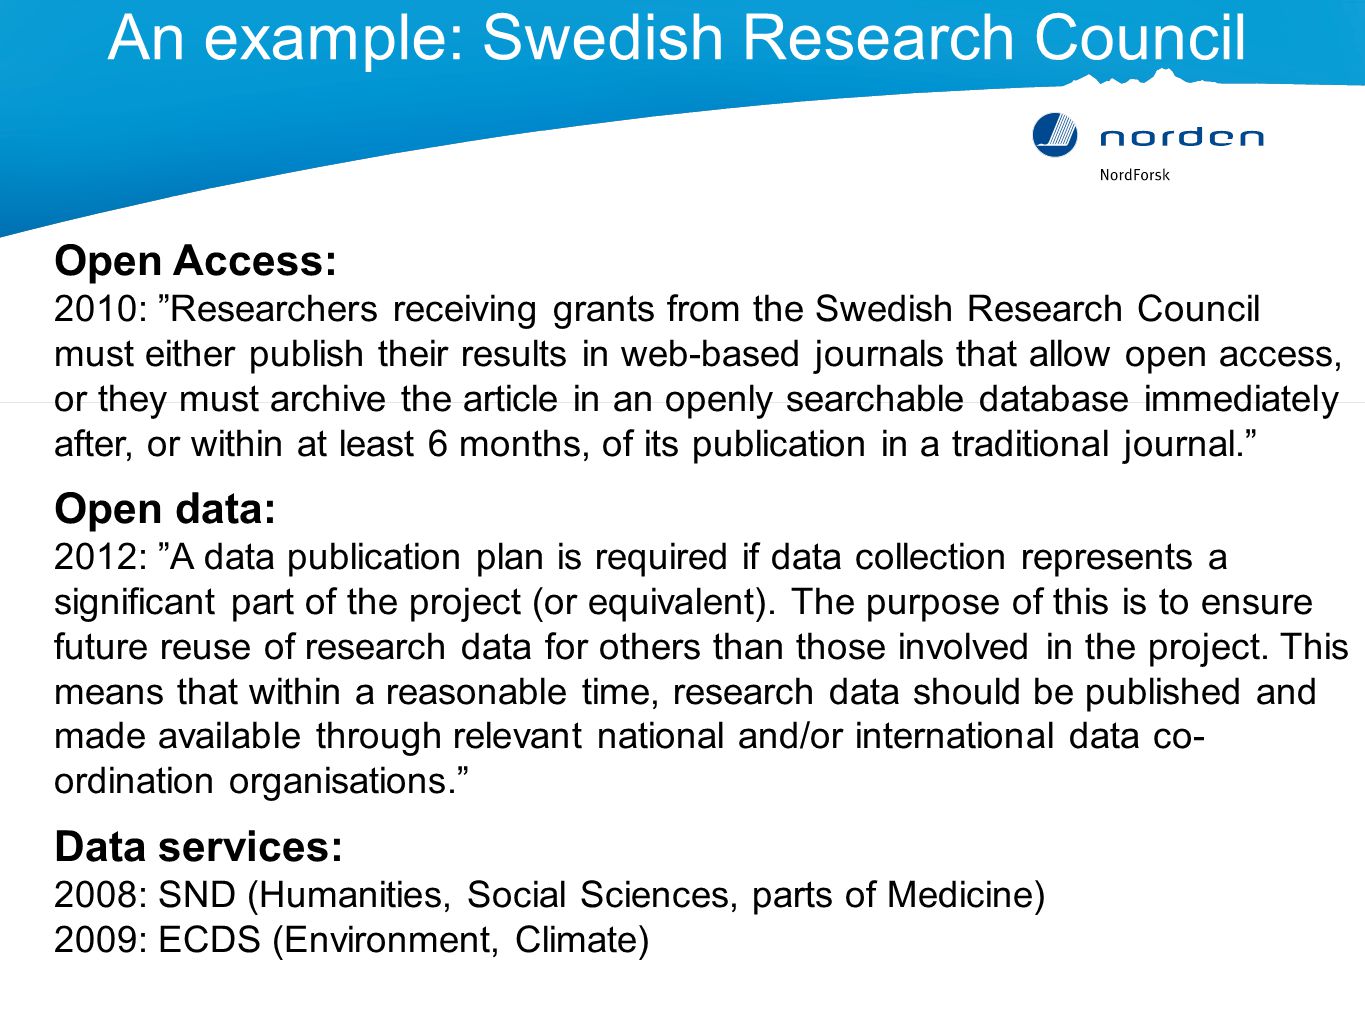 An example: Swedish Research Council Open Access: 2010: Researchers receiving grants from the Swedish Research Council must either publish their results in web-based journals that allow open access, or they must archive the article in an openly searchable database immediately after, or within at least 6 months, of its publication in a traditional journal. Open data: 2012: A data publication plan is required if data collection represents a significant part of the project (or equivalent).